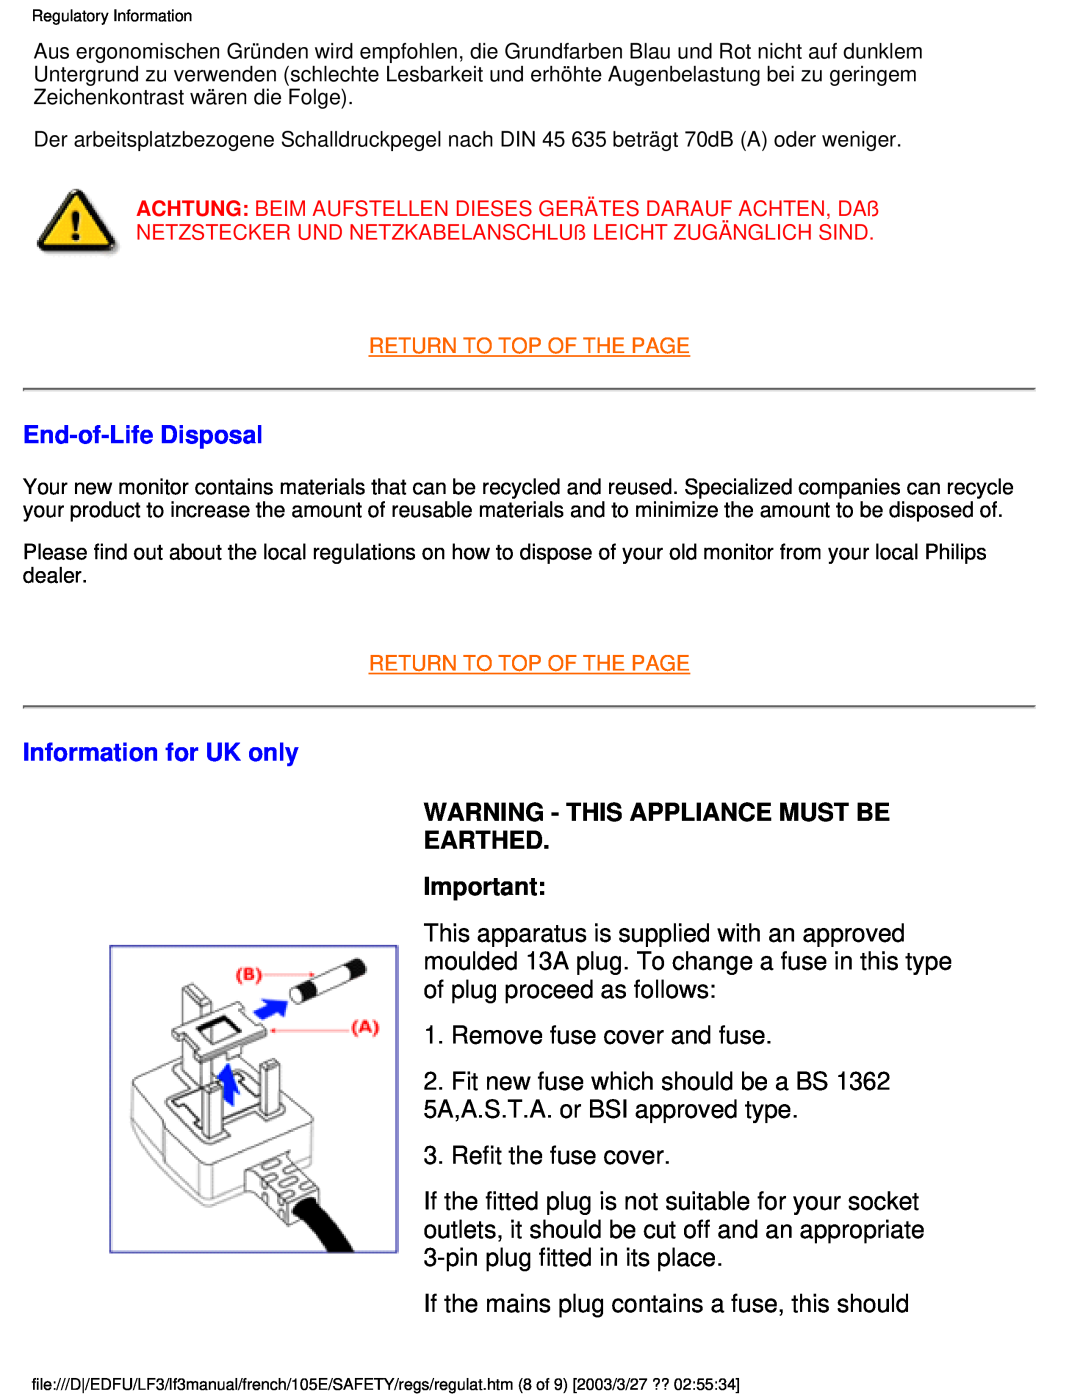 Philips 105E user manual End-of-Life Disposal, Information for UK only, Warning - This Appliance Must Be Earthed 